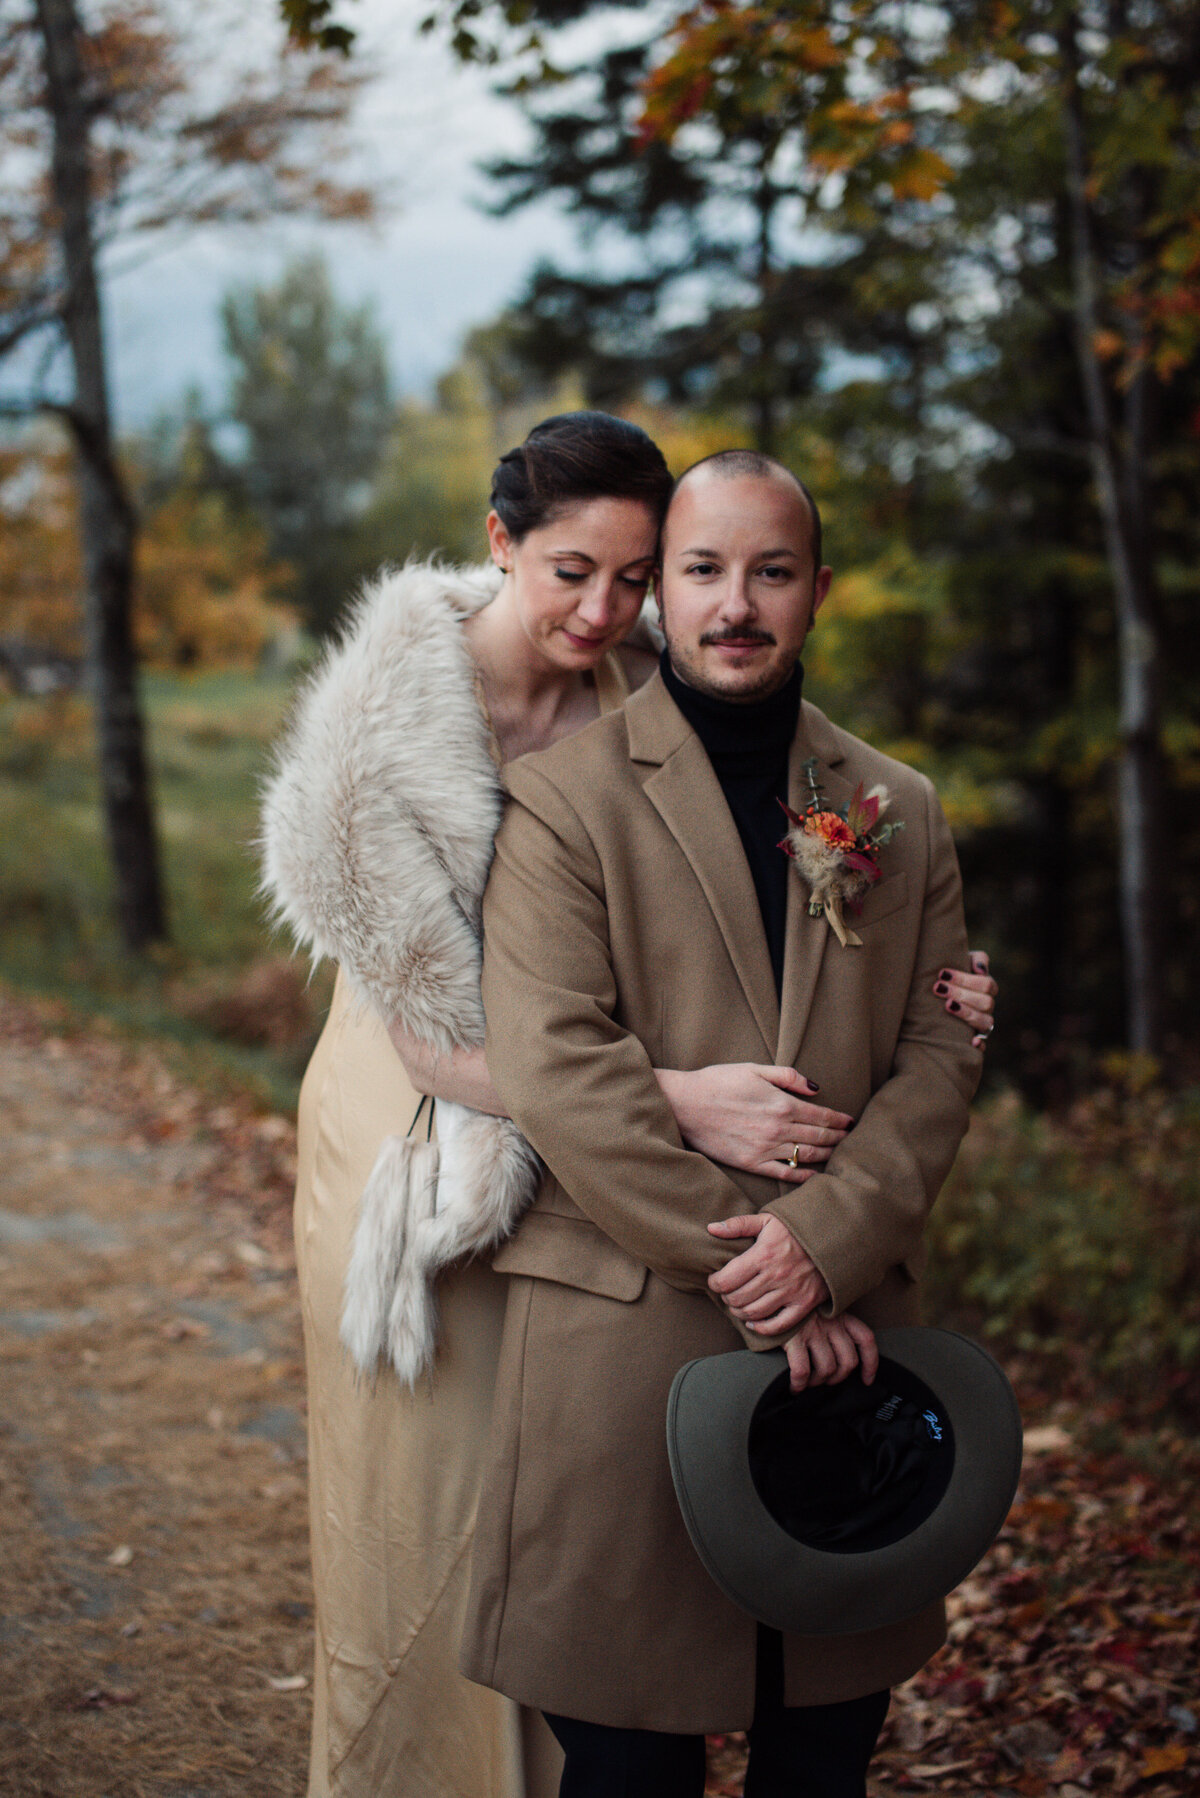 Couple embraces wearing vintage inspired outfits with florals by Blossoming Bough